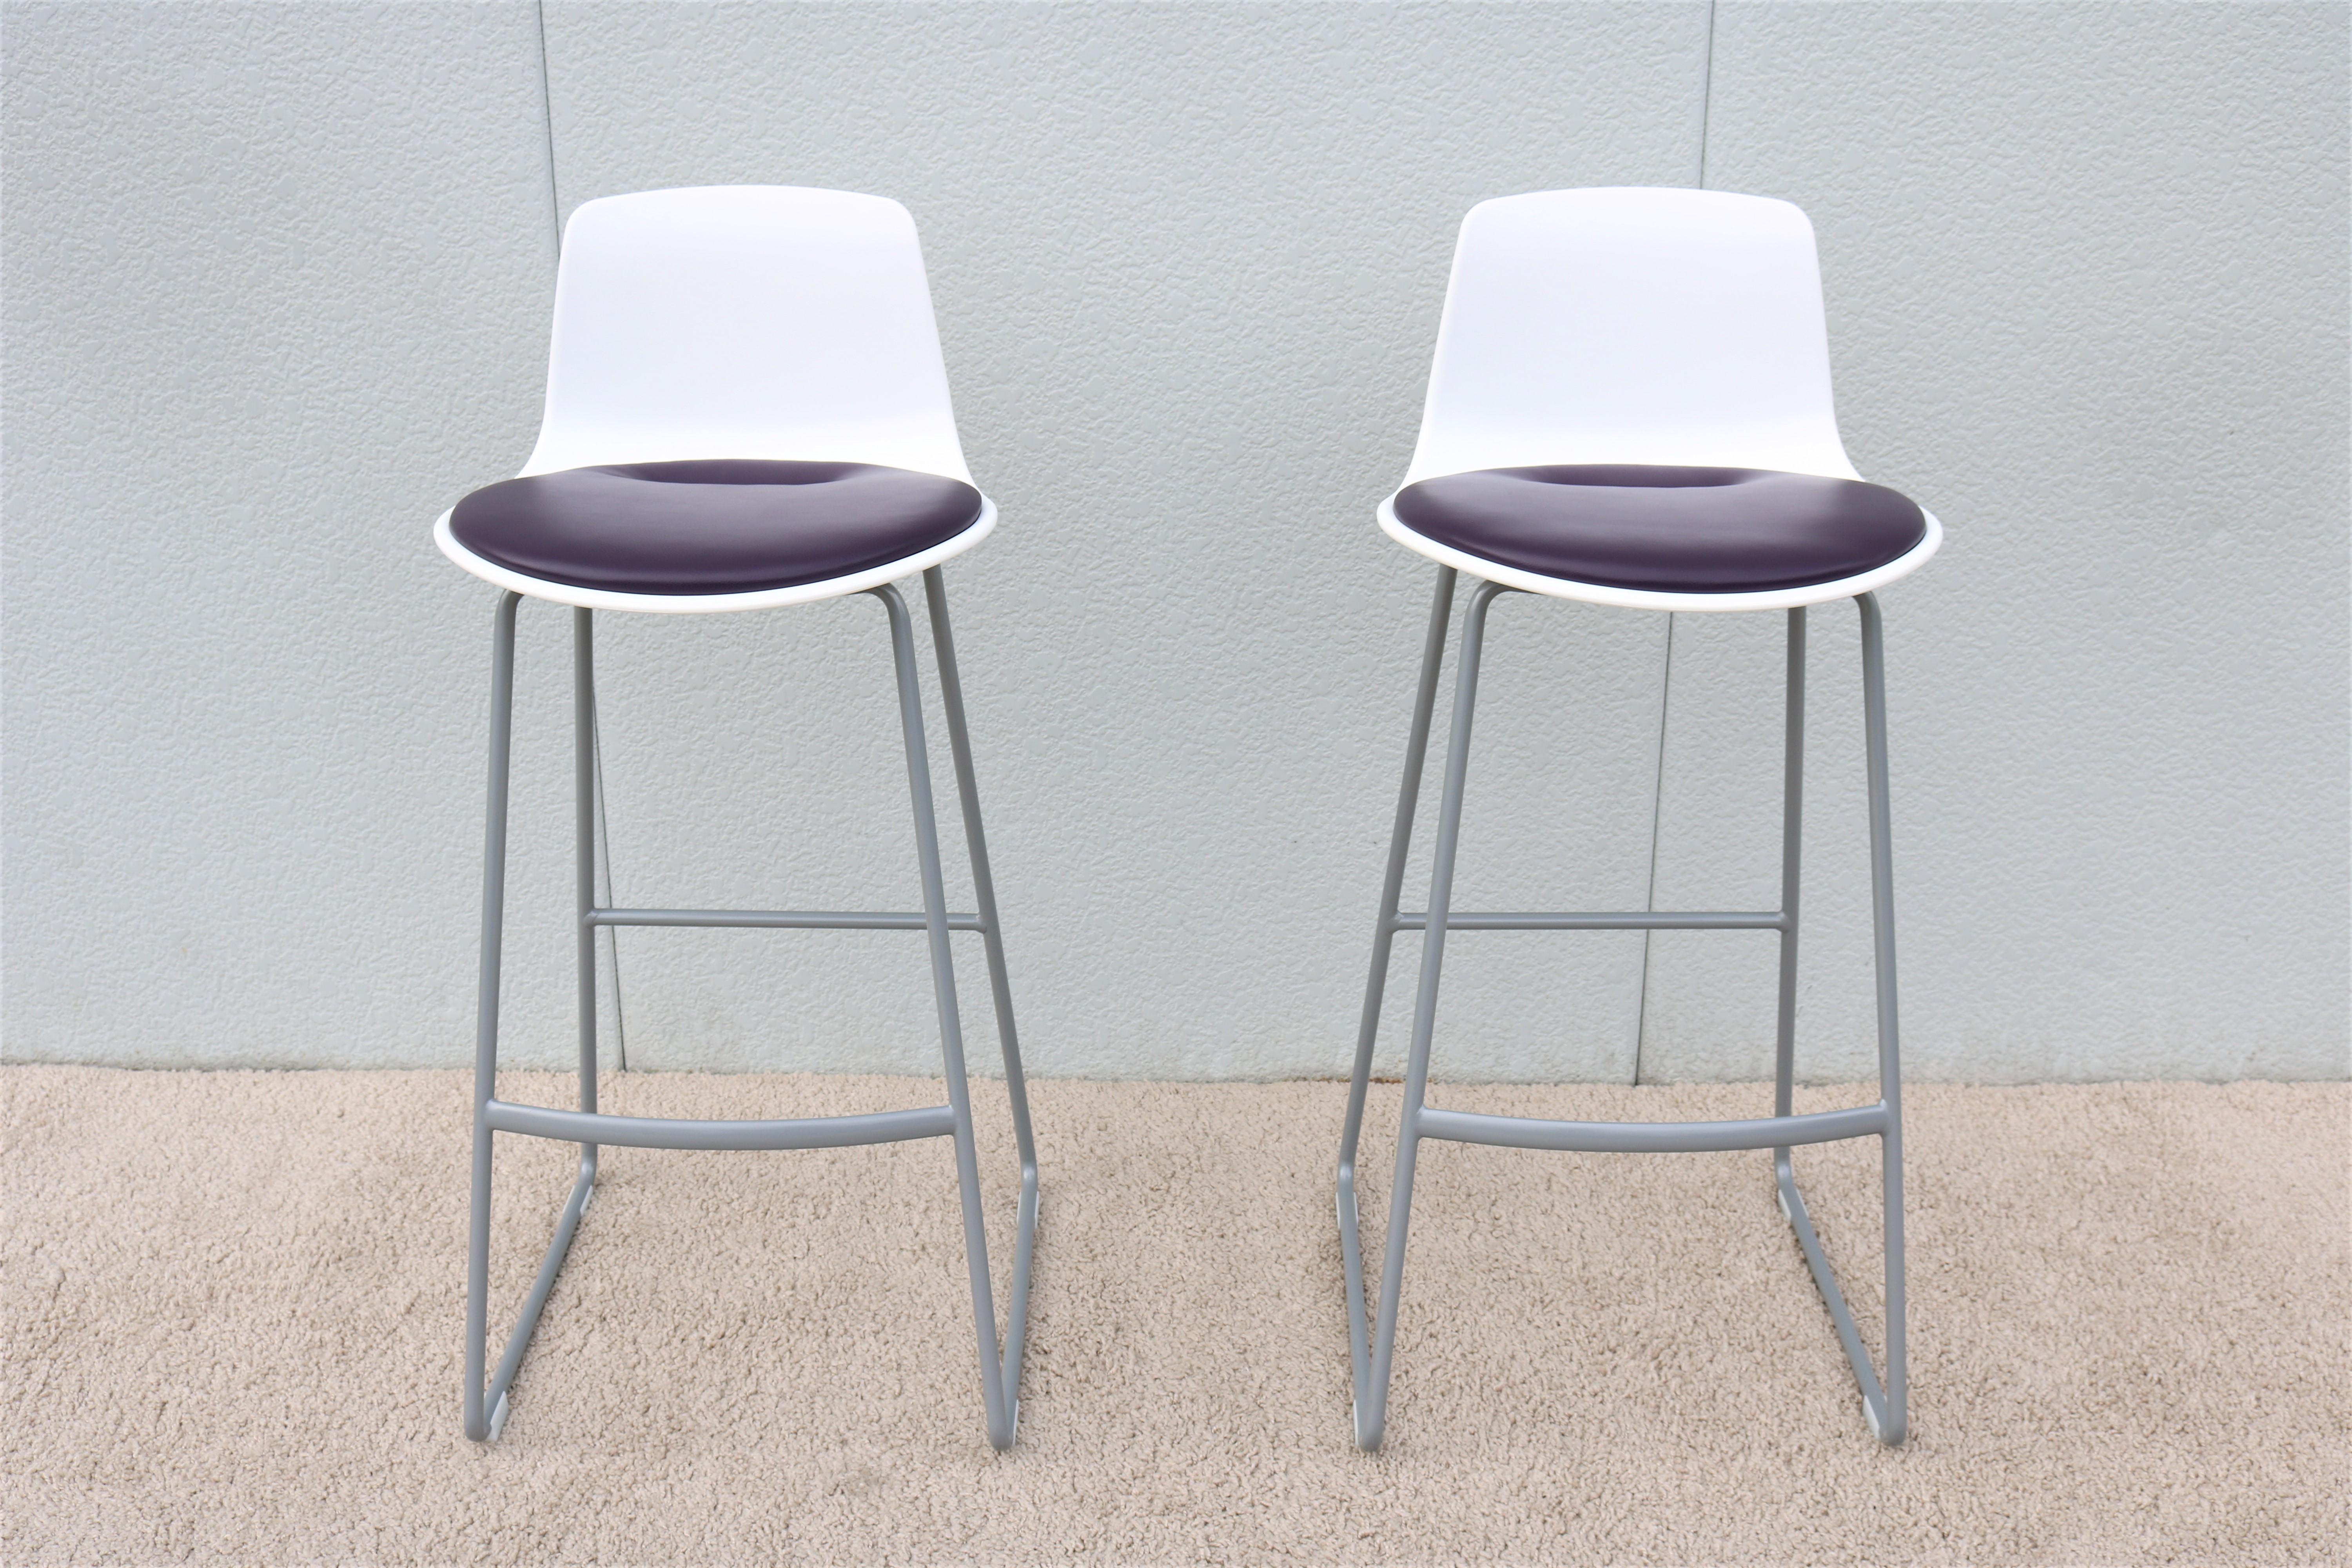 This slim and graceful Enea Lottus Bar height stools are comfortable and well-crafted,
Features flexible sculpted polypropylene shell with upholstered seat,
It's stylish and functional, Will integrates simply and cleanly with any space,

Please